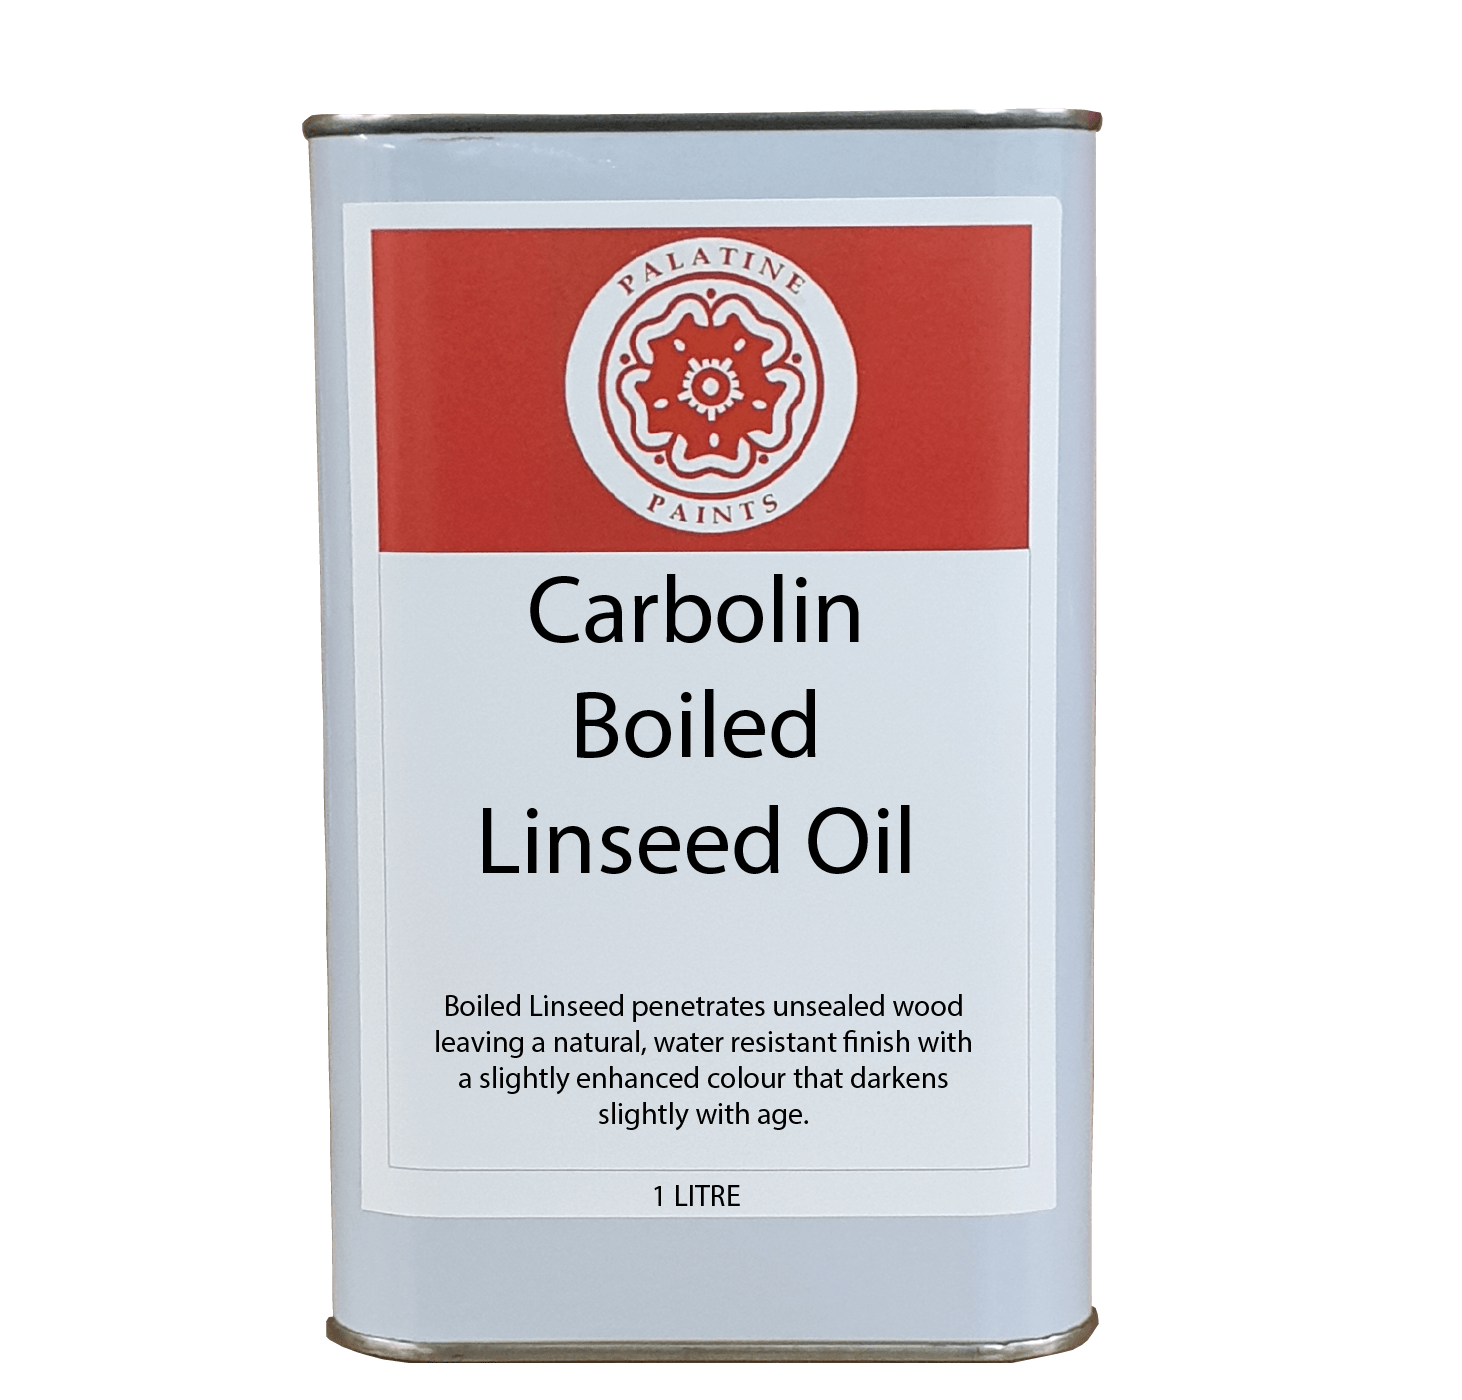 Carbolin Boiled Linseed Oil - Palatine Paints - Natural Water Resistance Best Finish Over Boiled Linseed Oil